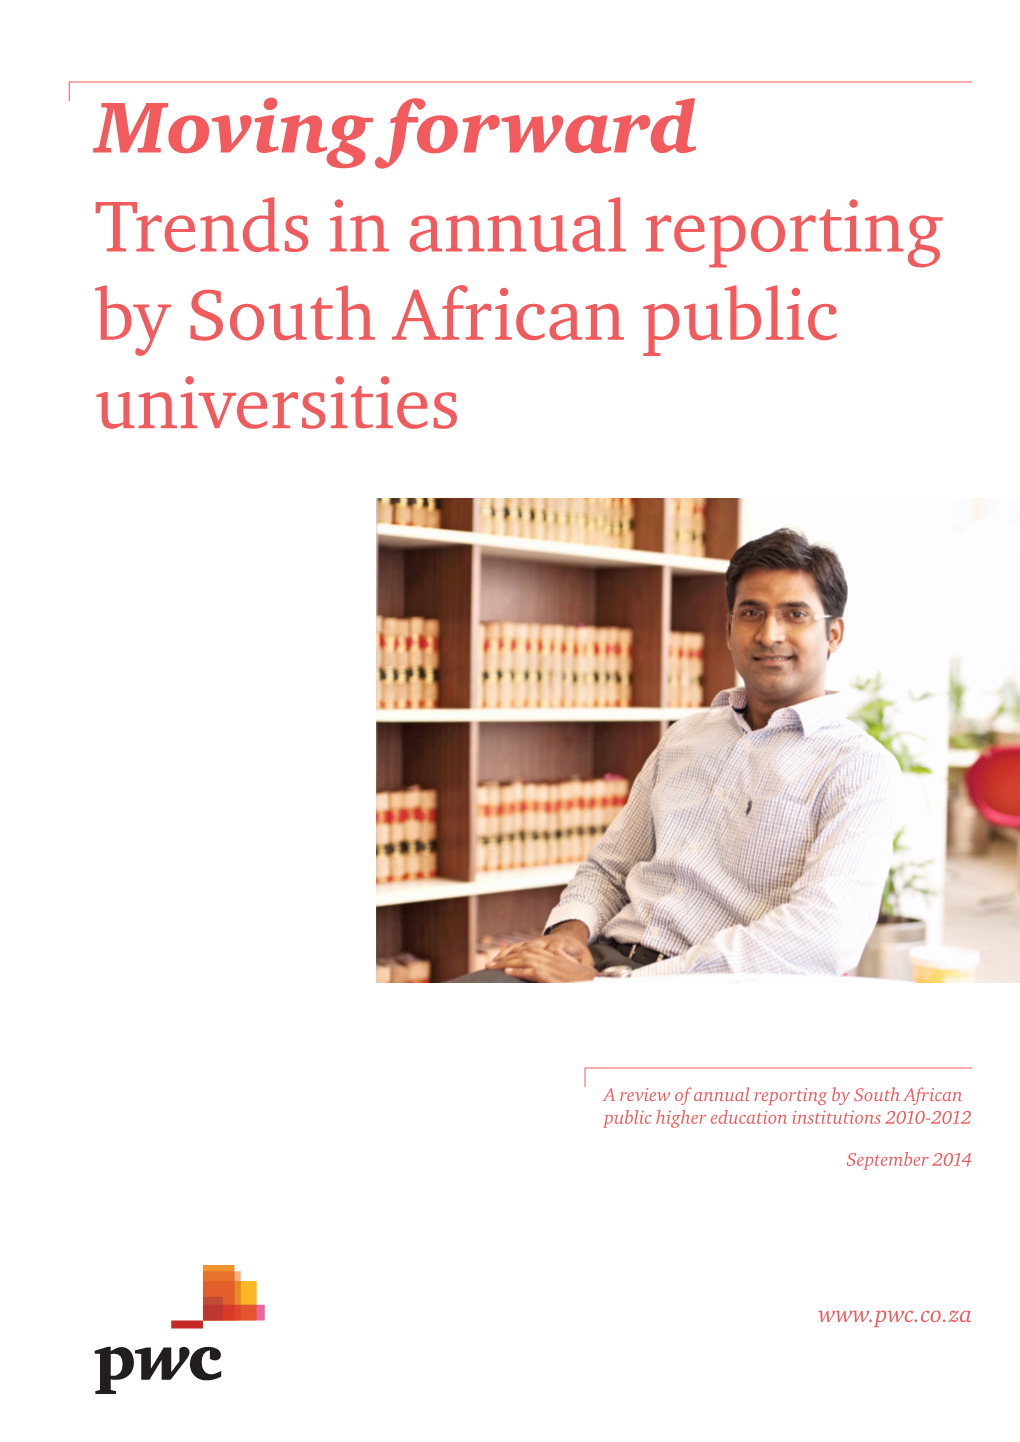 Moving Forward Trends in Annual Reporting by South African Public Universities